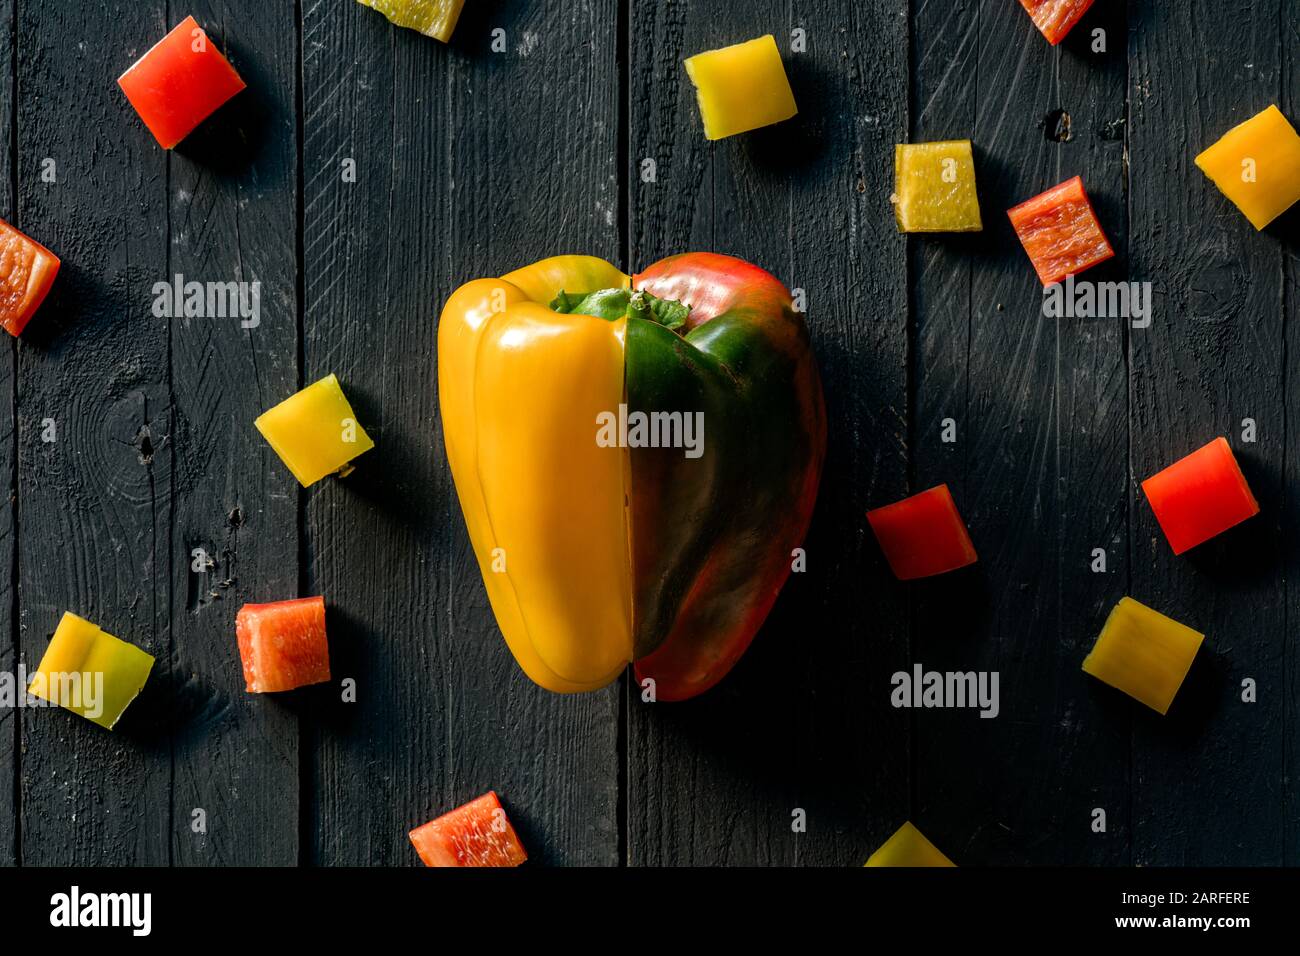 Red And Yellow Peppers Sliced on Black Wooden Surface Stock Photo